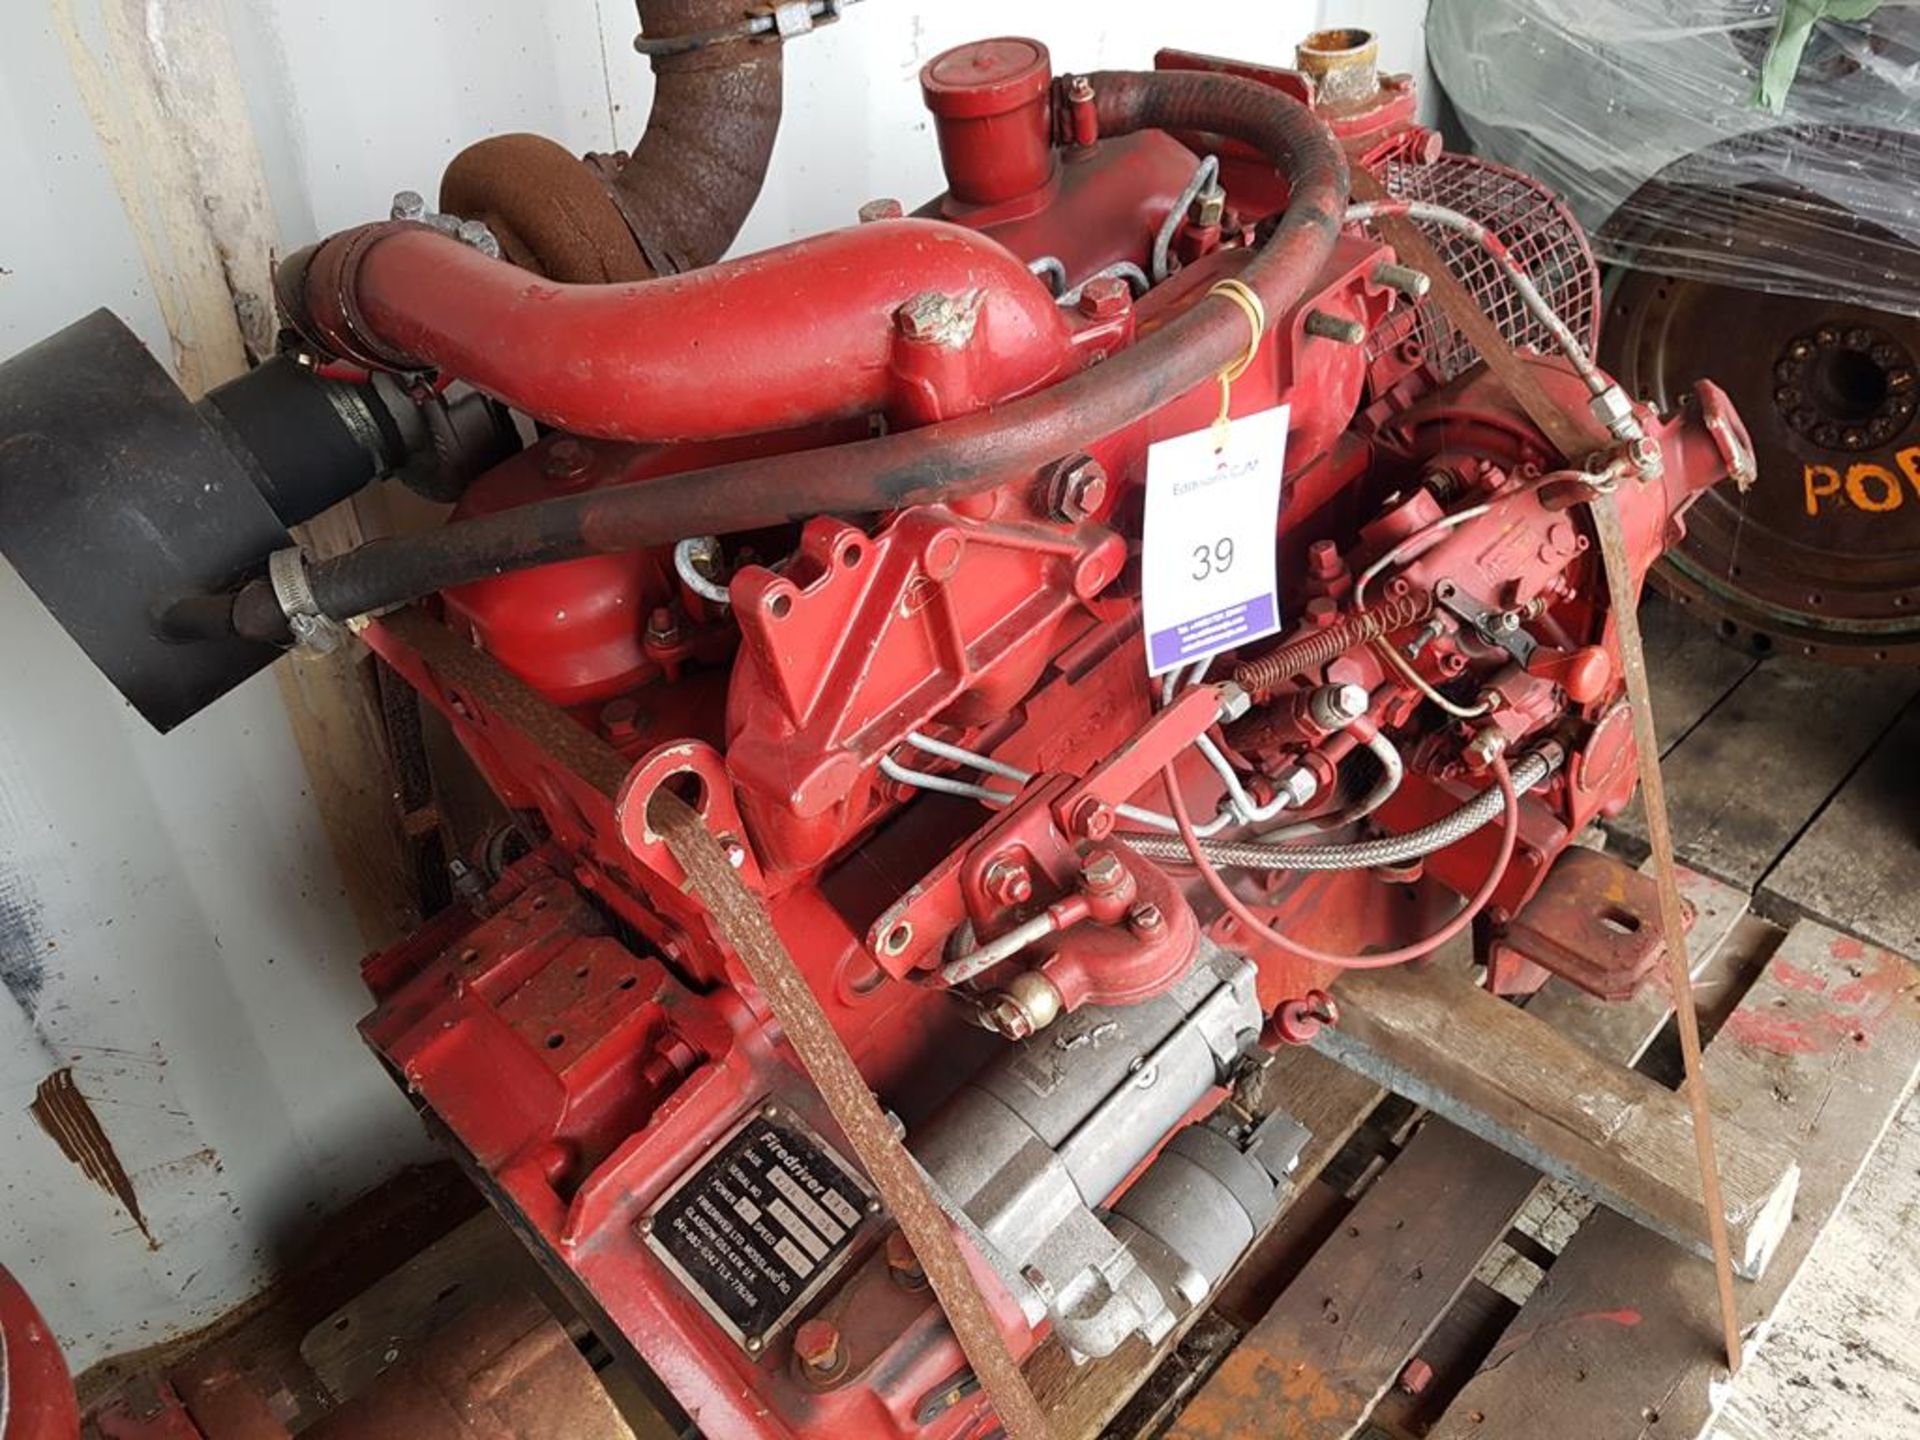 Iveco 82HP Diesel Engine for Firedriver Firepump, Ex Standby - Image 2 of 2